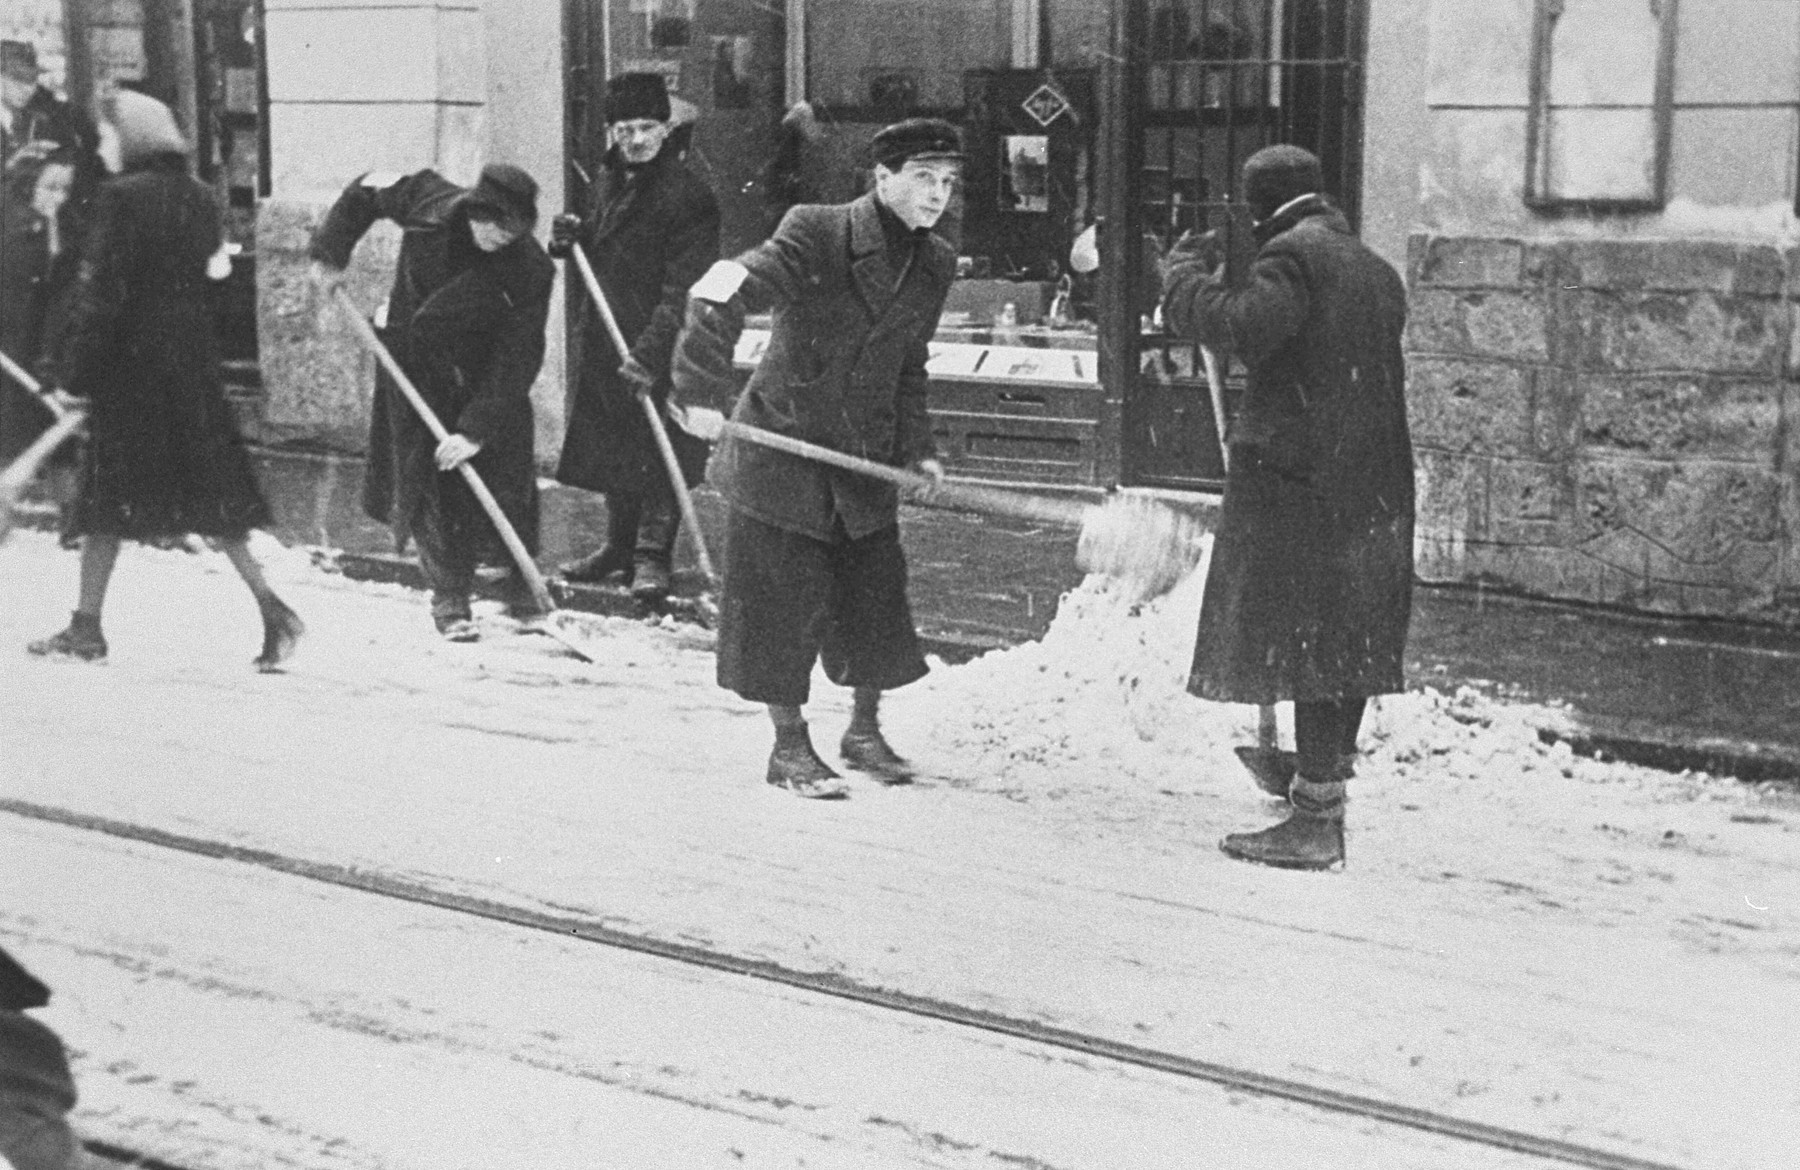 Jews wearing armbands are forced to shovel snow from the pavement in Krakow.